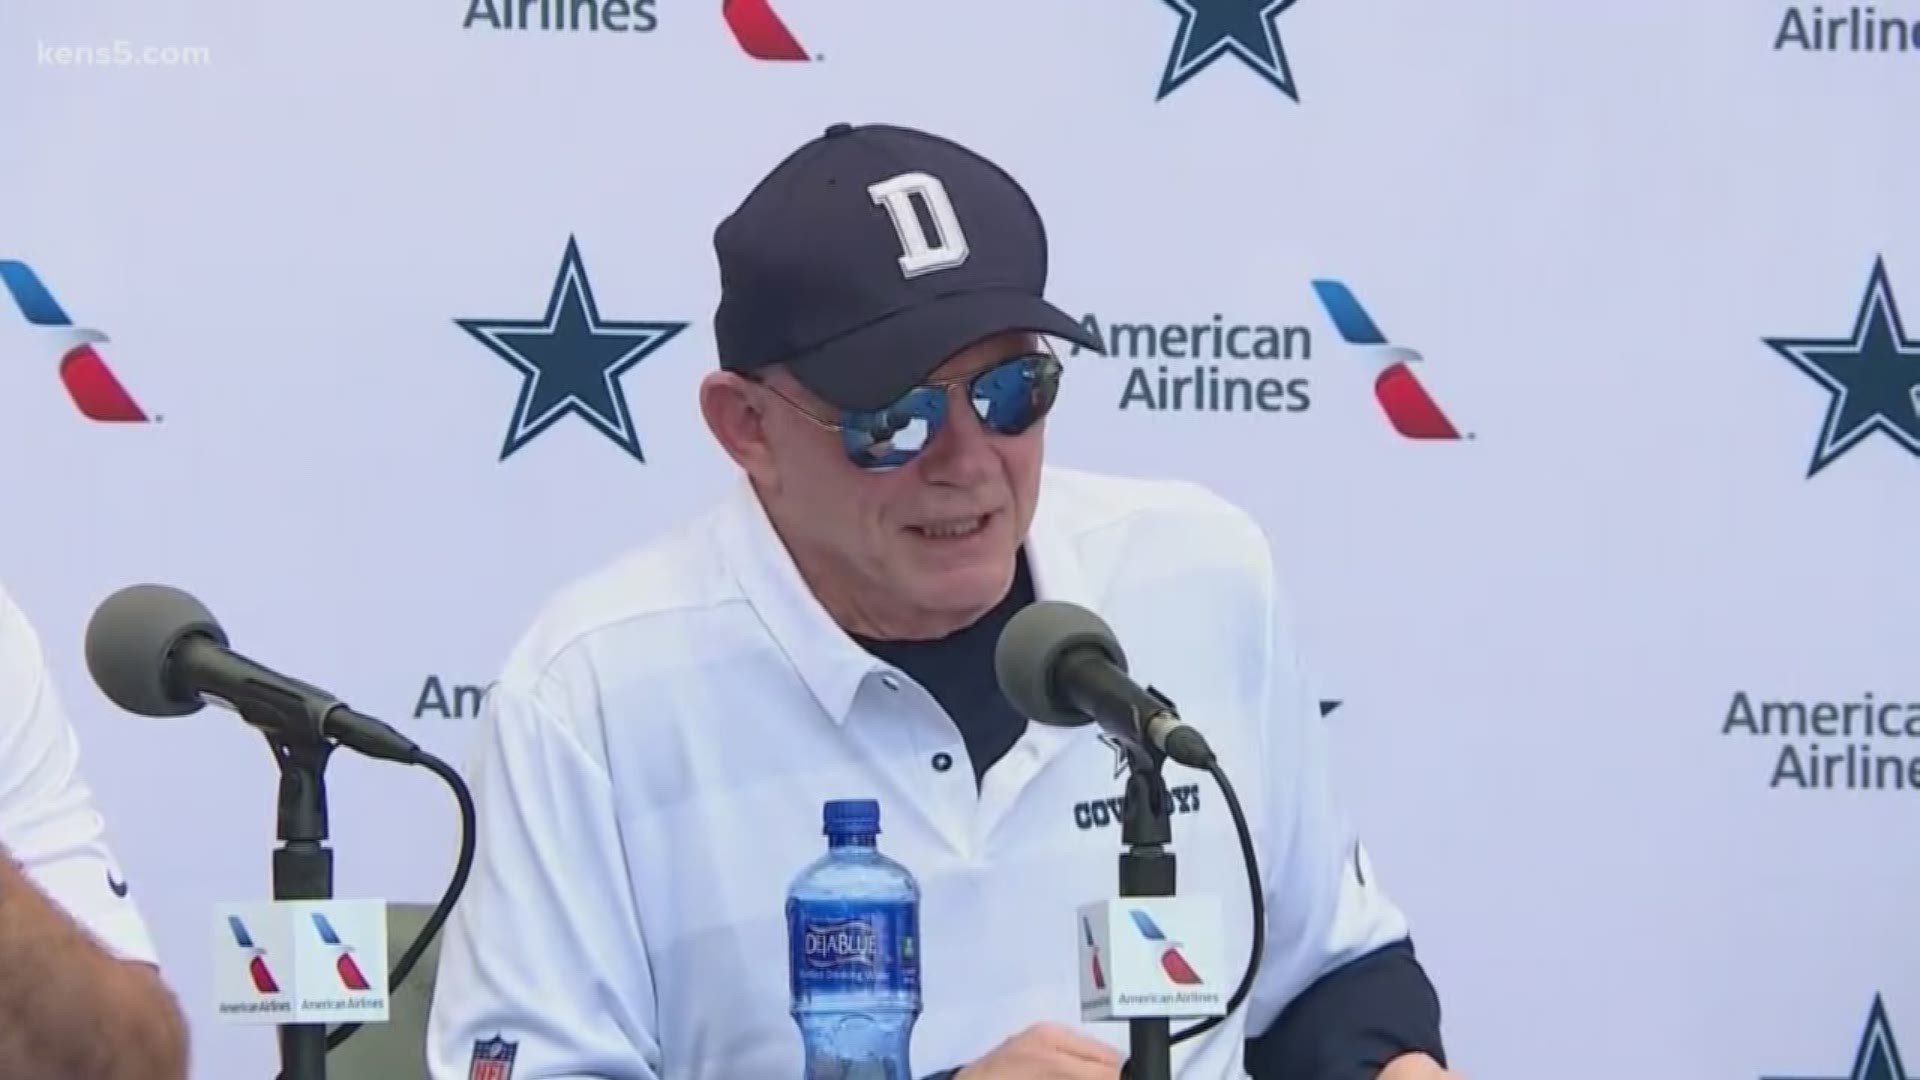 Cowboys owners Jerry Jones emphatically backed head coach Jason Garrett on Wednesday during the annual "State of the Cowboys" press conference.